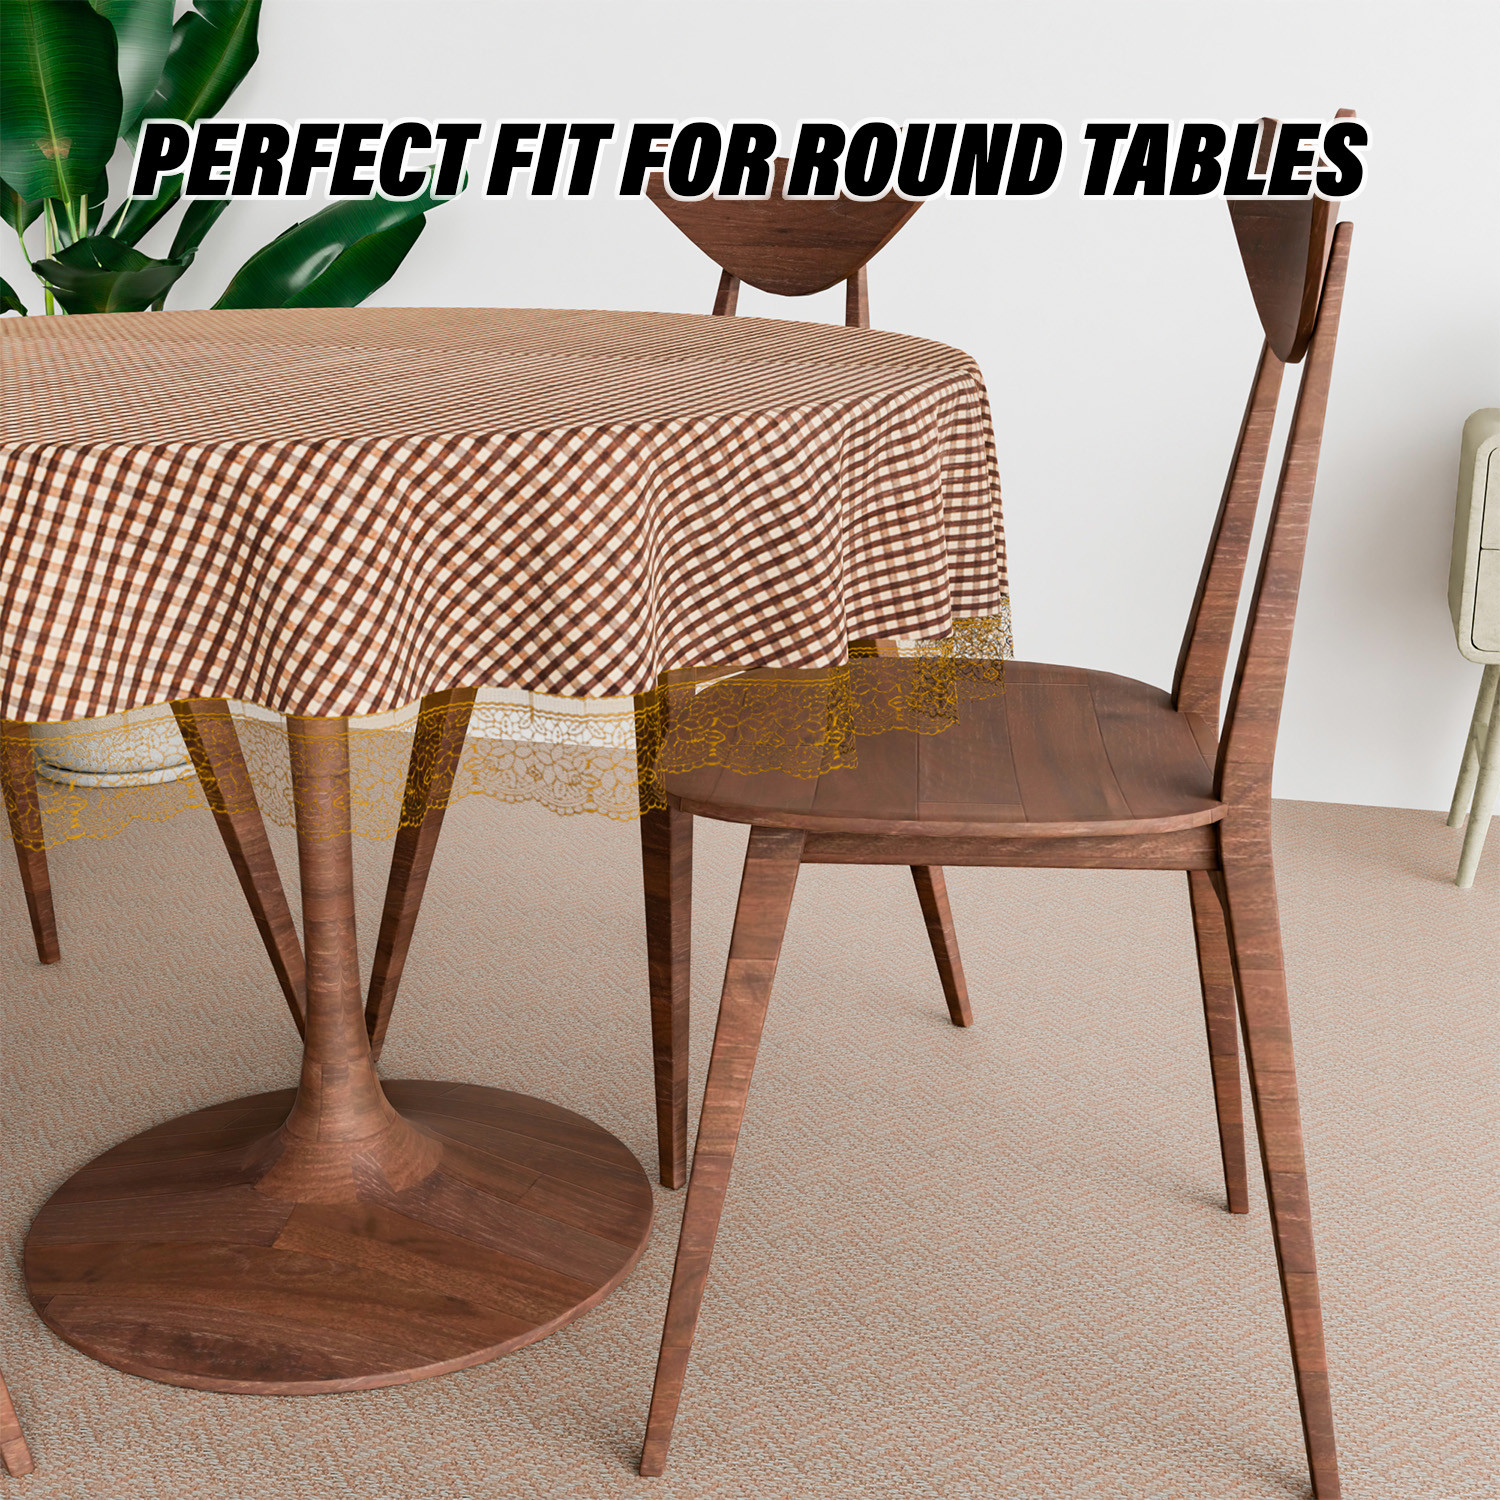 Kuber Industries Round Table Cover | Table Cloth for Round Tables | 4 Seater Round Table Cloth | Barik Check Kitchen Dining Tablecloth | Tabletop Cover | 60 Inch | Brown